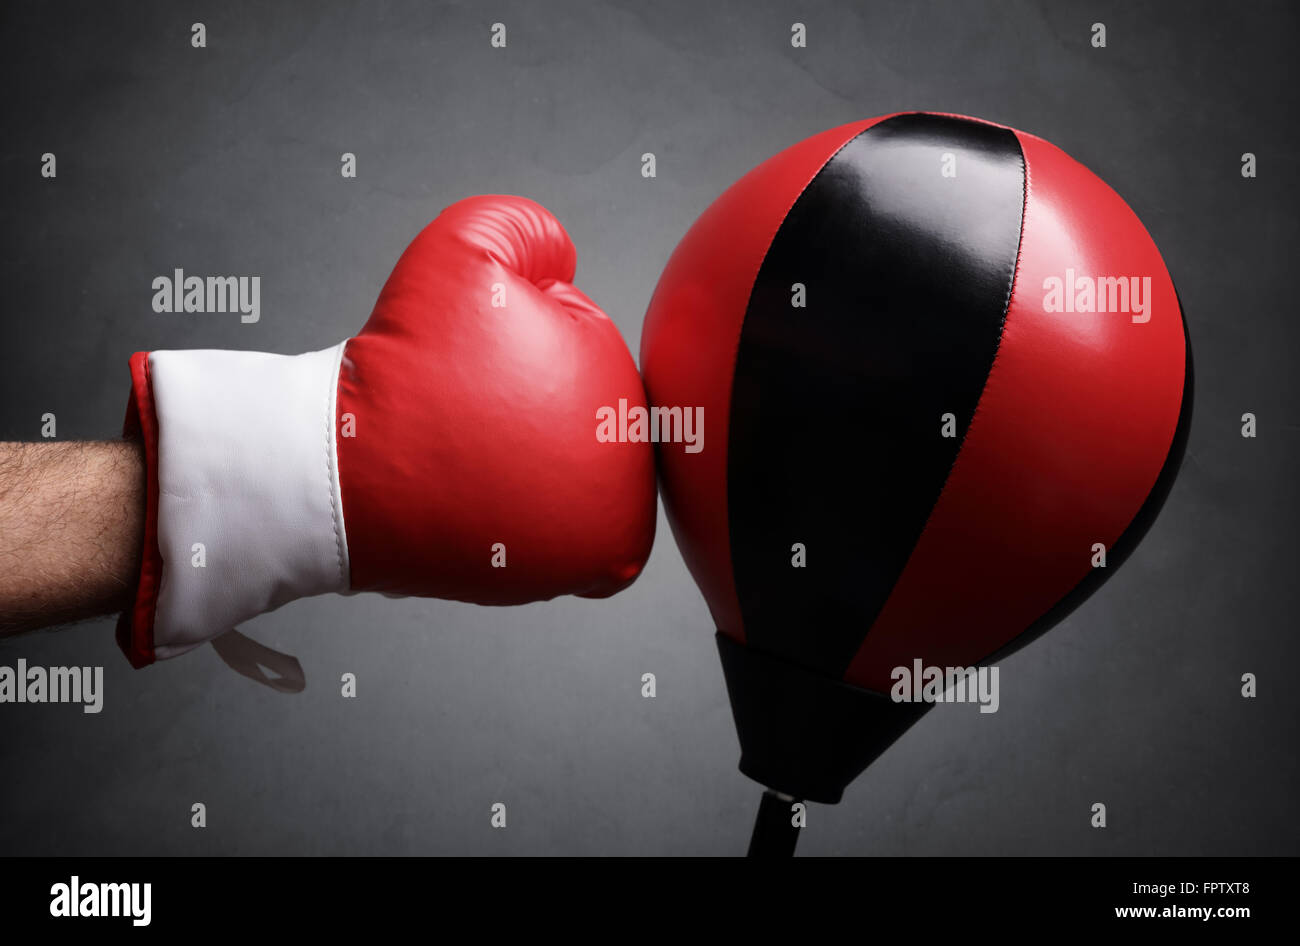 Punching a red punch bag concept for competition, challenge, conflict or leadership in business Stock Photo